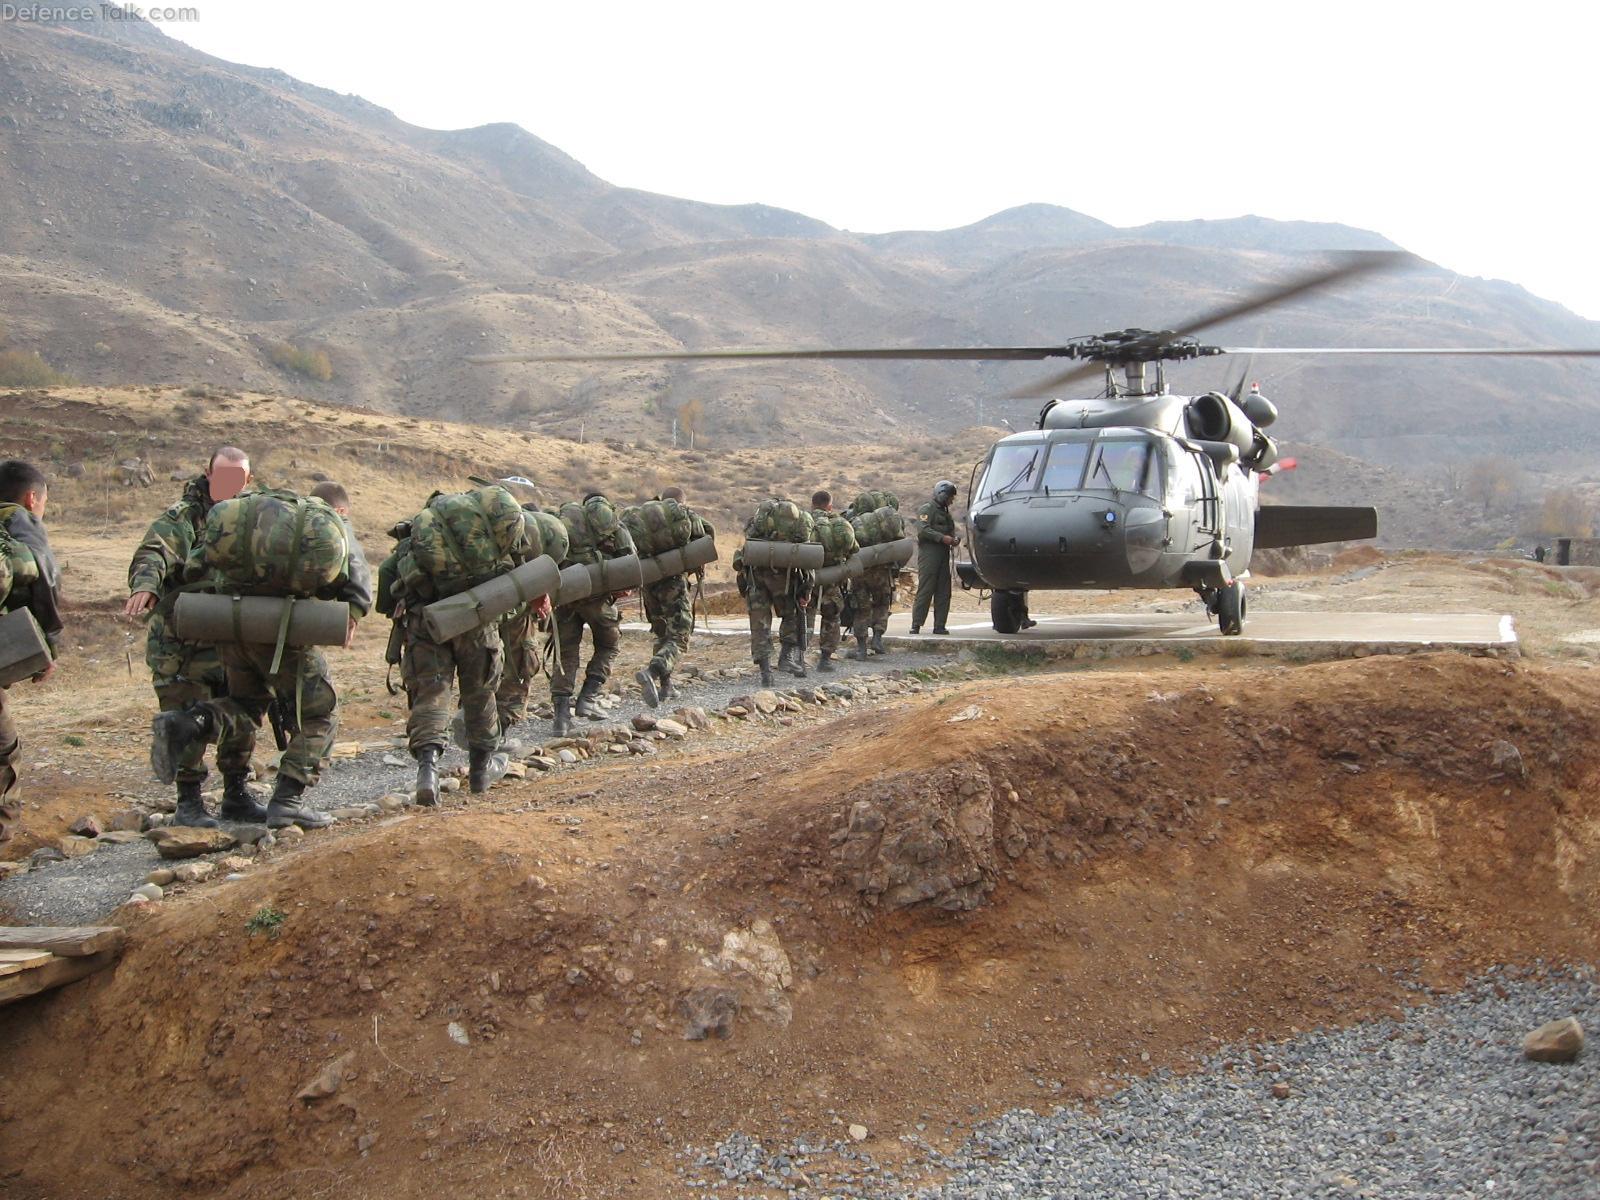 S-70 in Operation